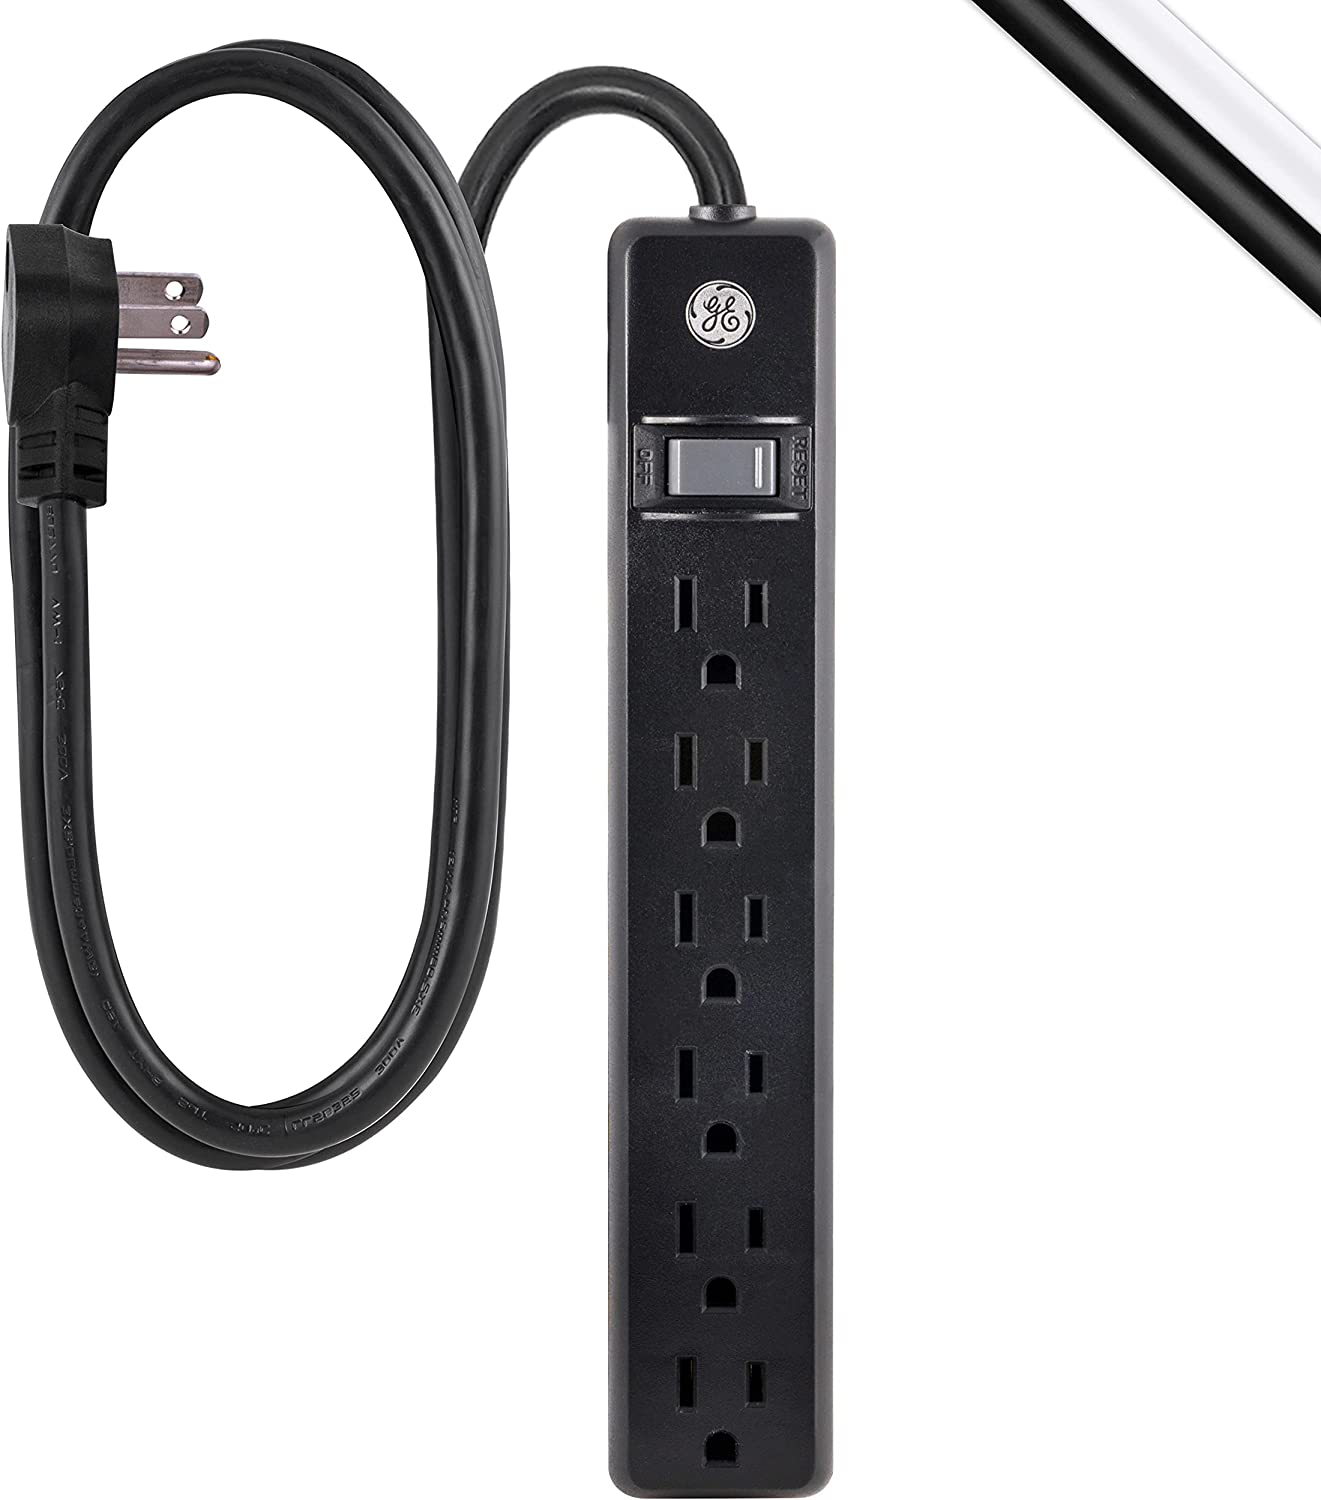 GE, White, 6 Outlet 2 Pack, 2 Ft Cord, Switched Power Strip, Integrated Circuit Breaker, Overload Protection, Wall Mountable, 3 Prong, UL Listed, 14833, Count